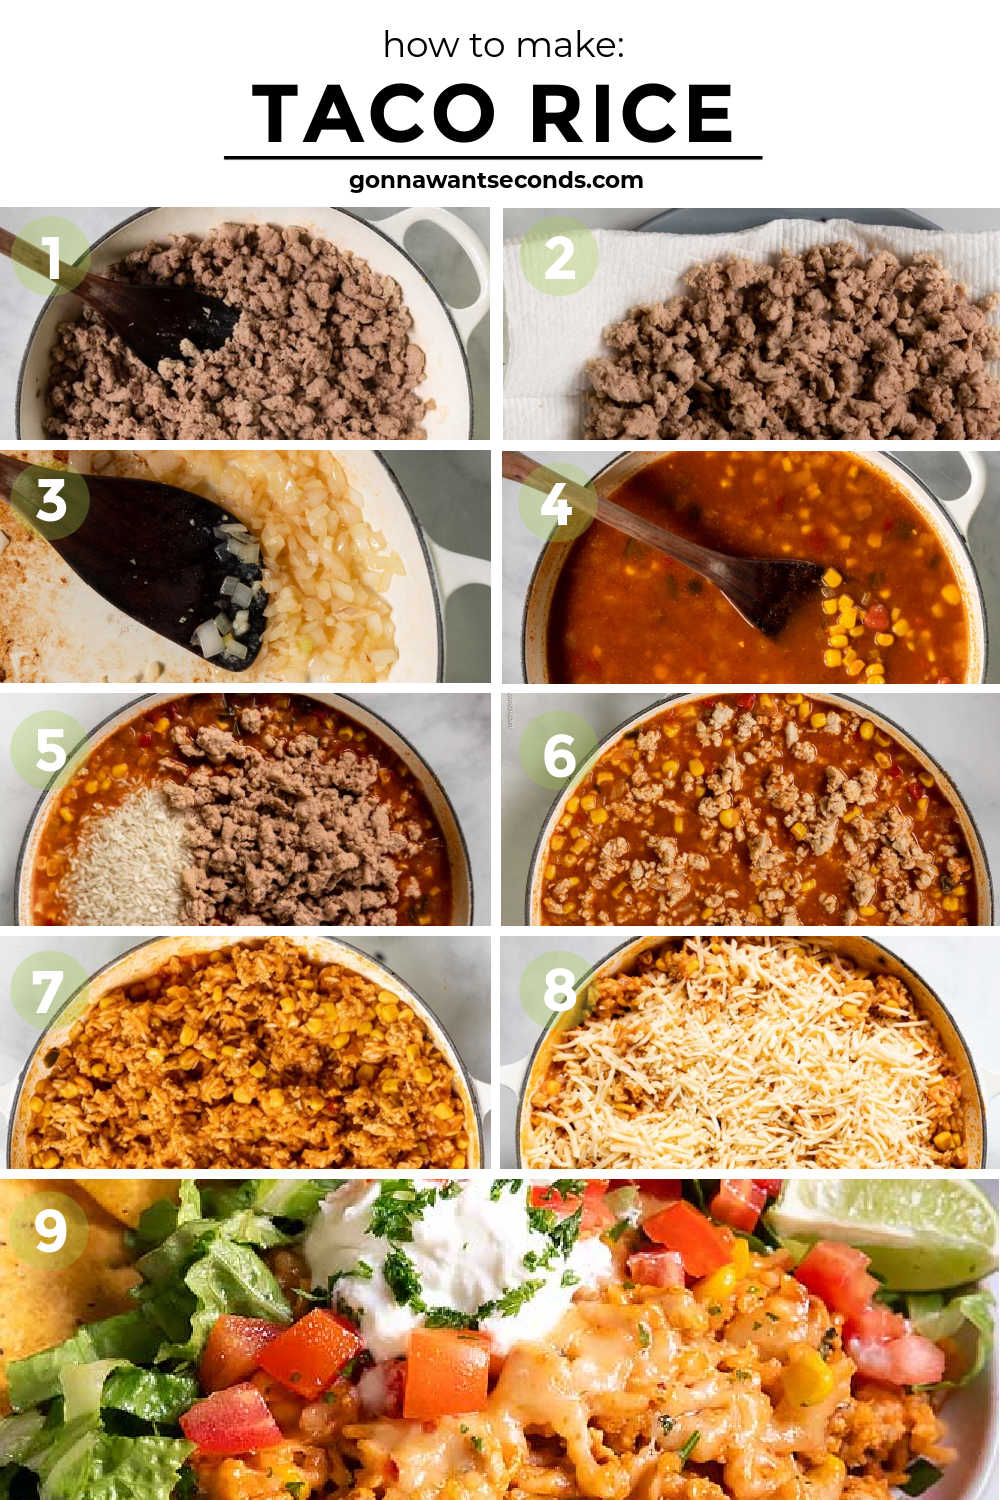 step by step how to make taco rice